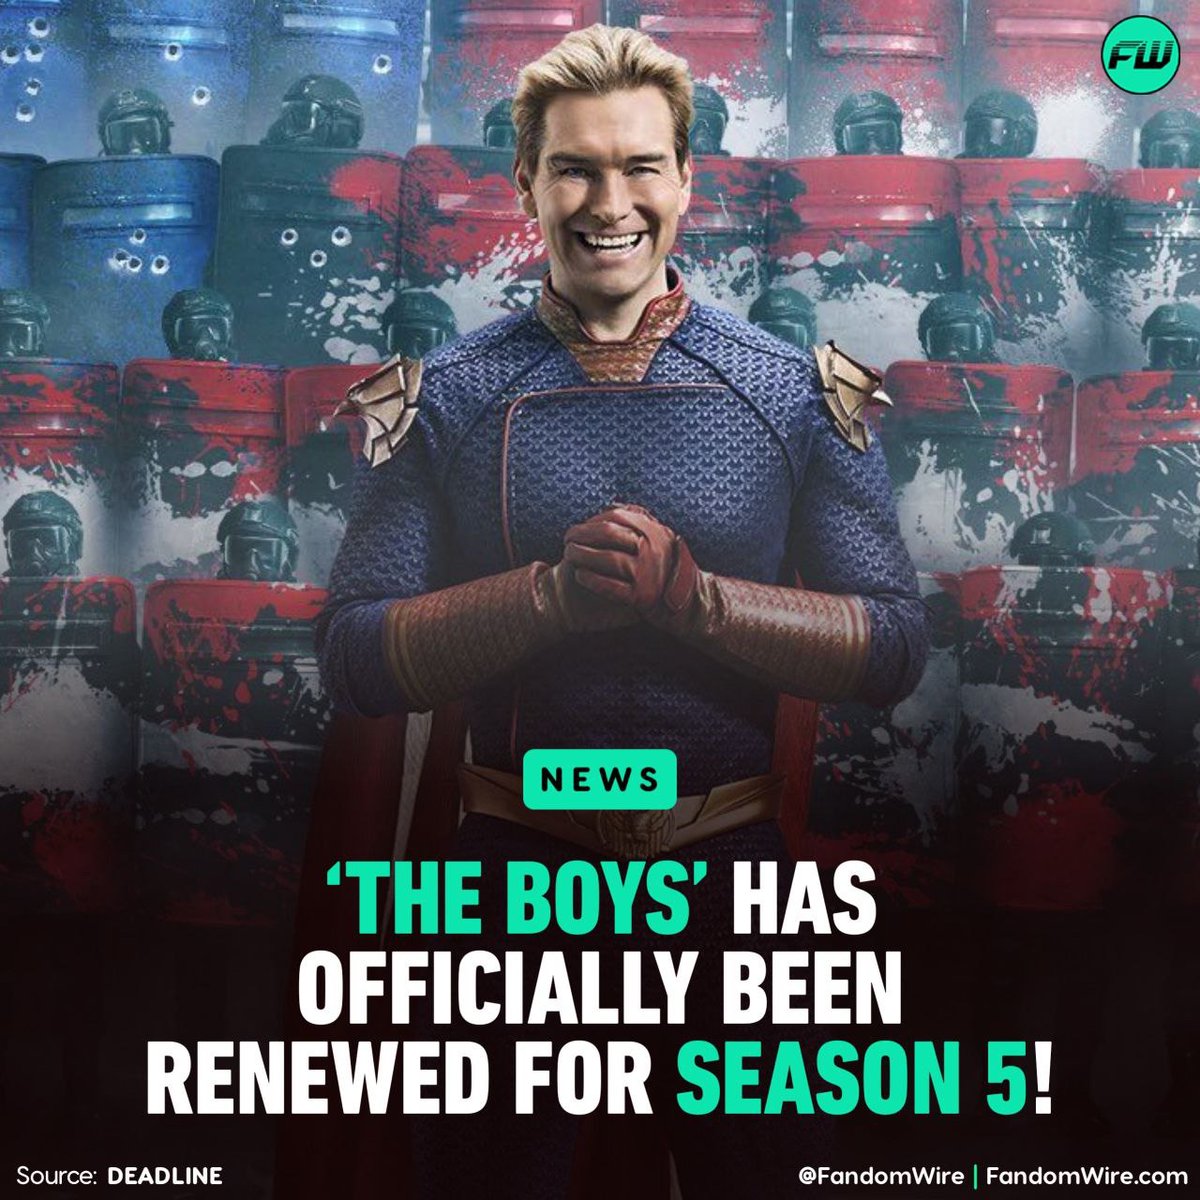 ‘THE BOYS’ has been renewed for Season 5. Season 4 premieres in one month.